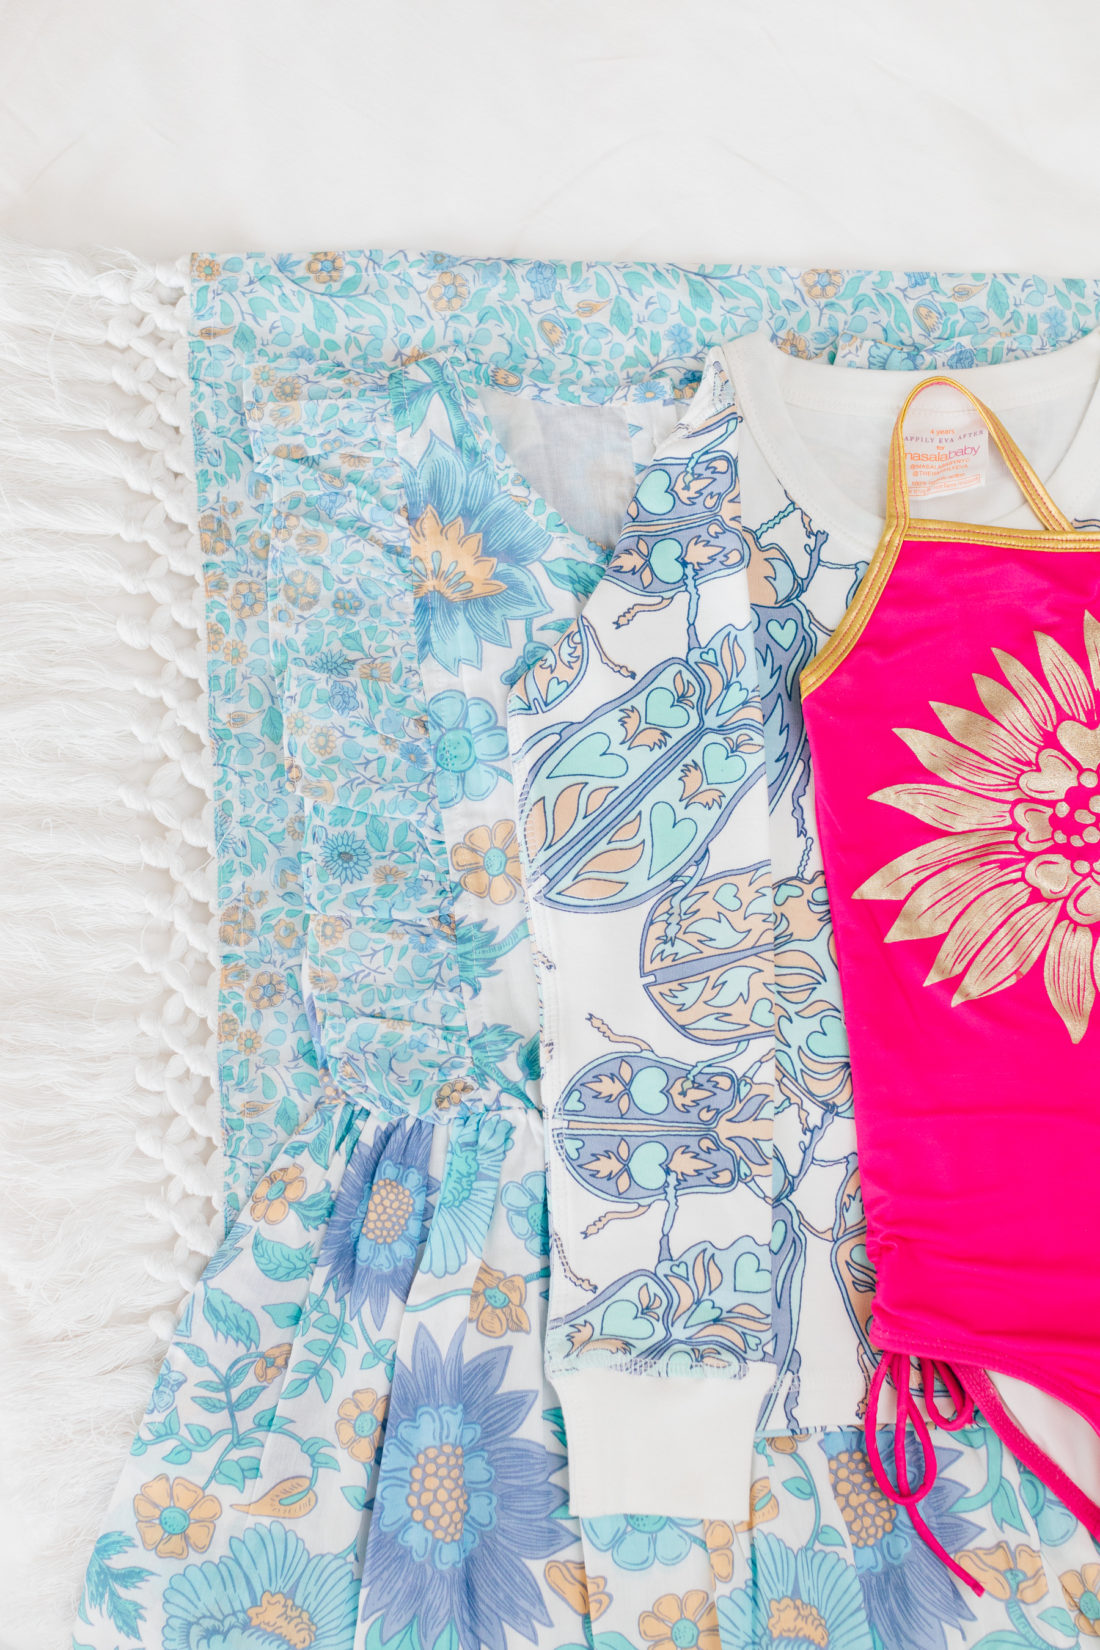 The Happily Eva After x Masala Baby resort capsule collection is layed out on a white background with an array of patterns in blue tones and a pop of color in the bright fuschia bathing suit